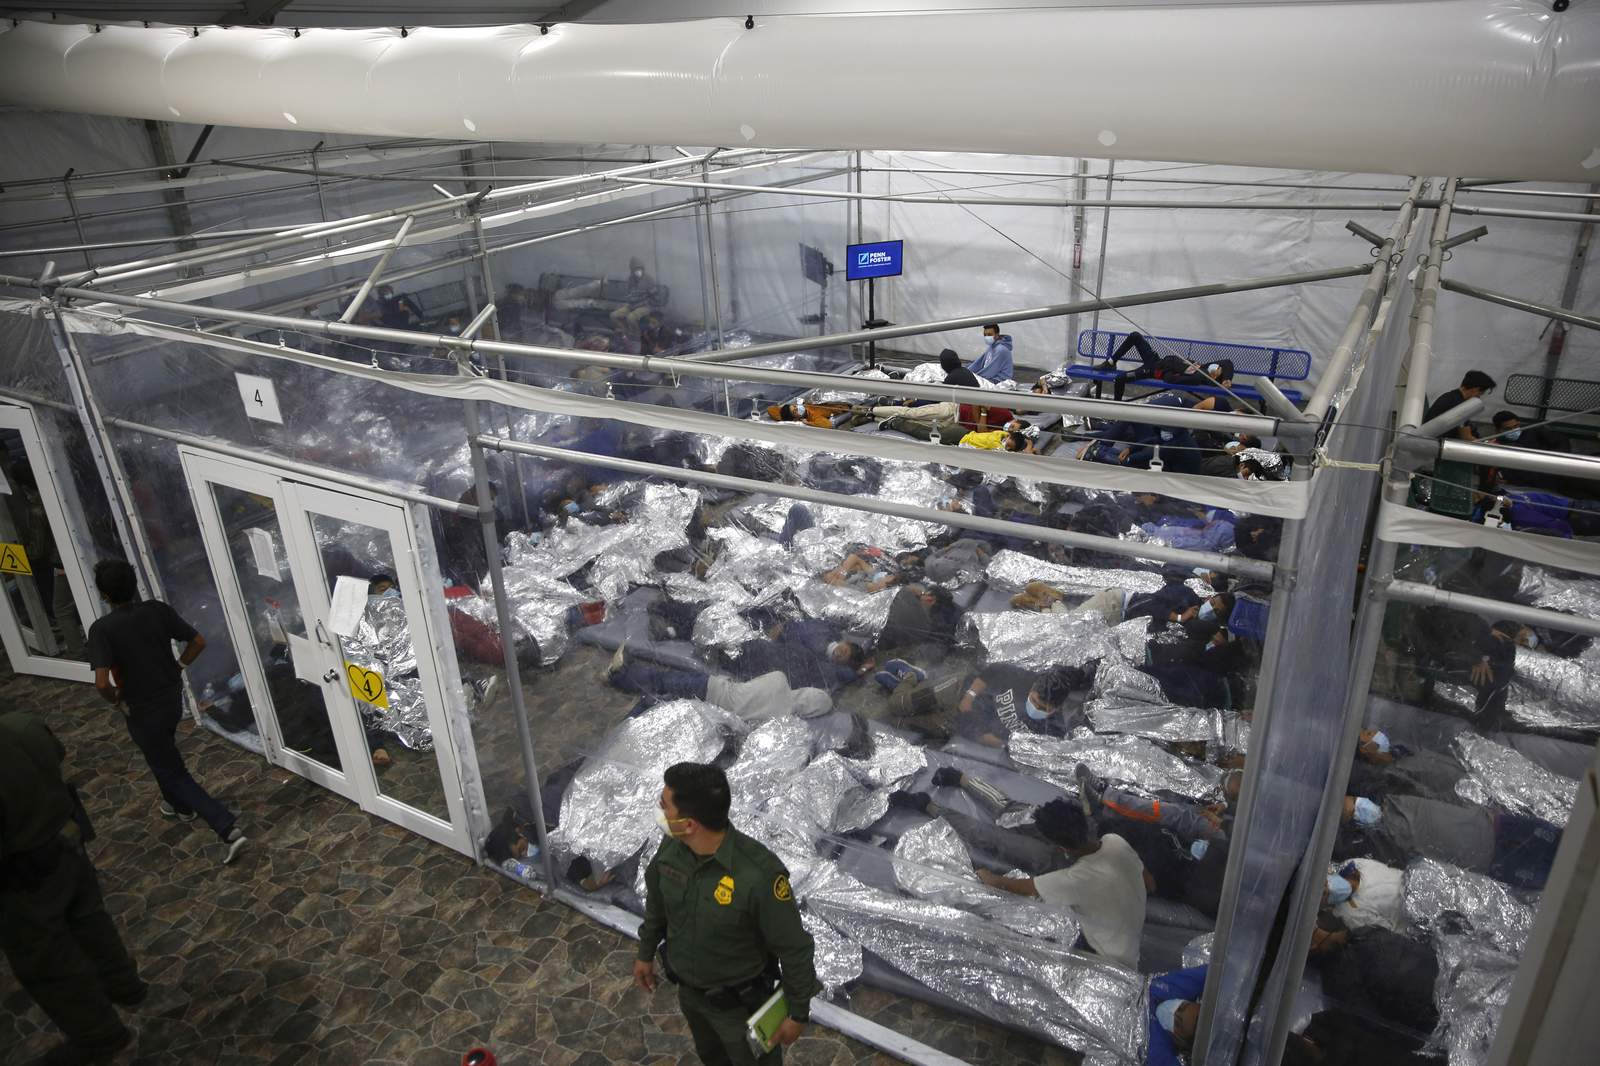 EXPLAINER: Questions remain about conditions of migrant kids